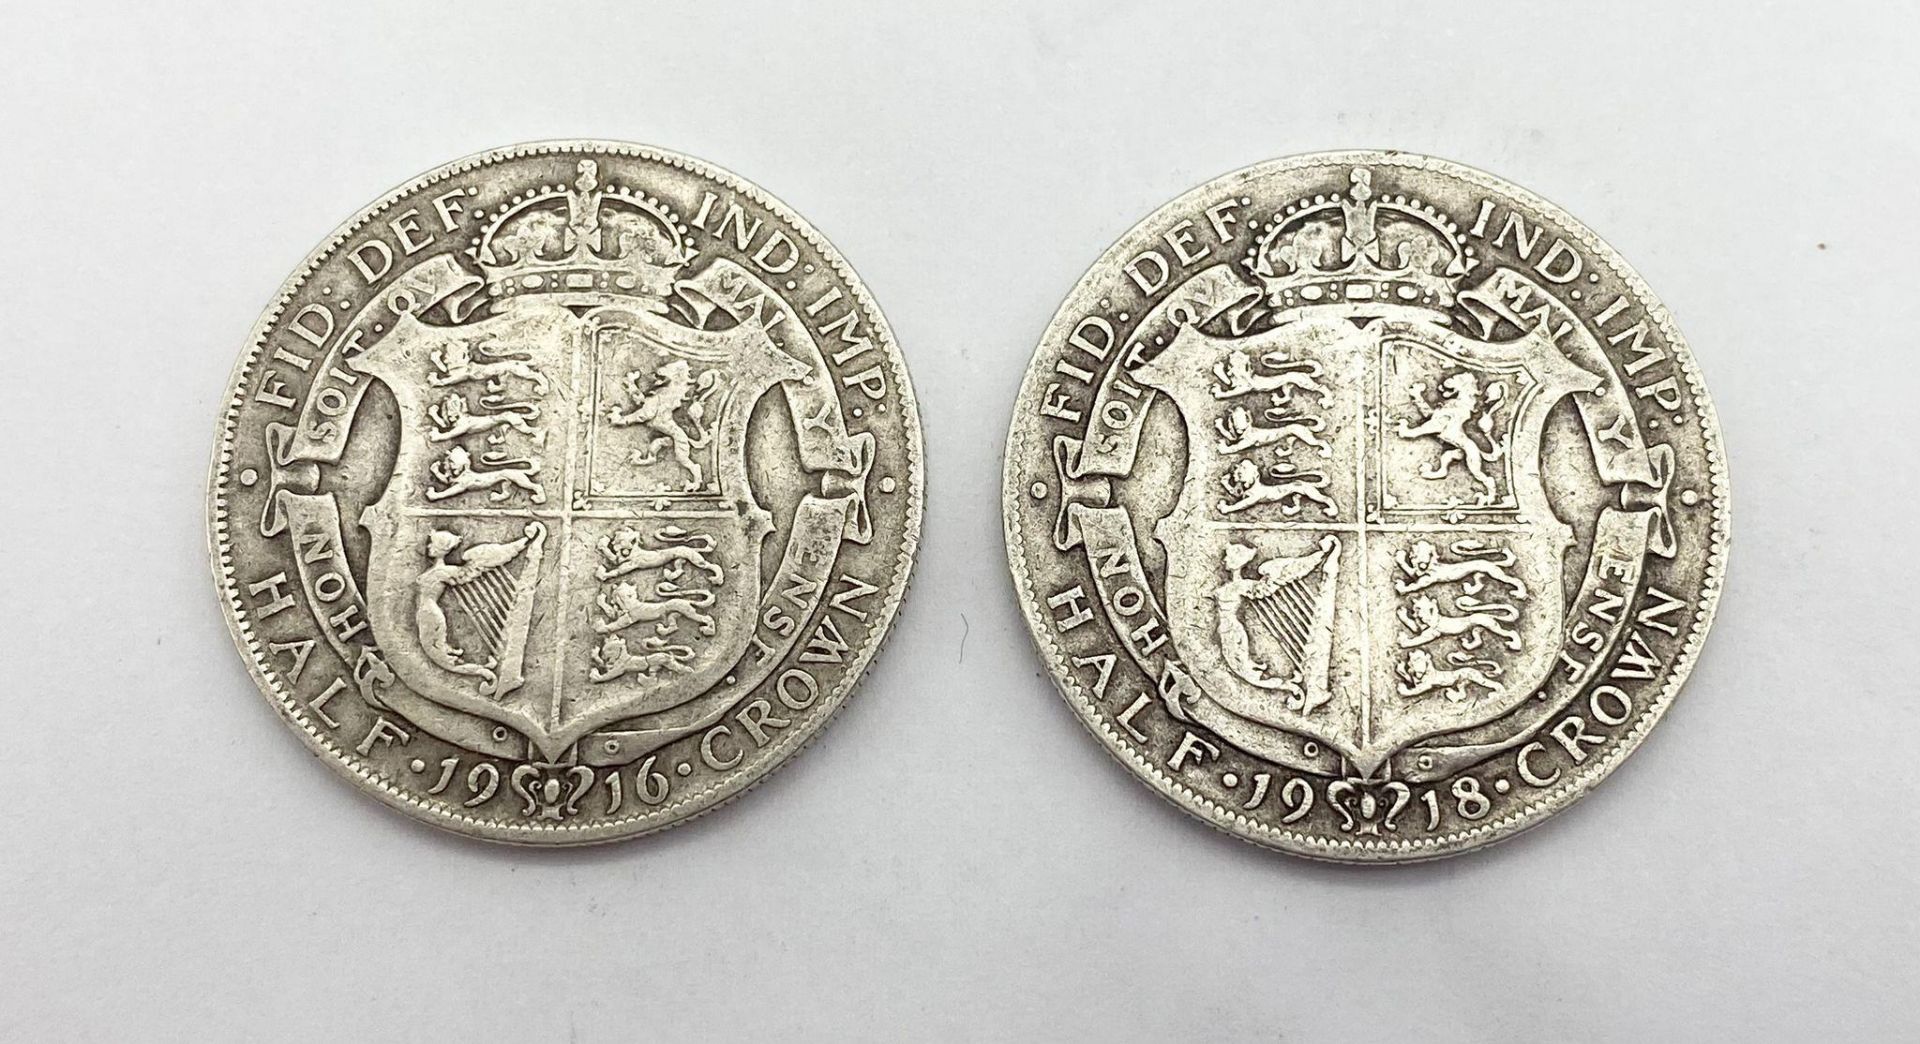 A British 1916 and a 1918 Silver Half Crown Coin. Please see photos for conditions.